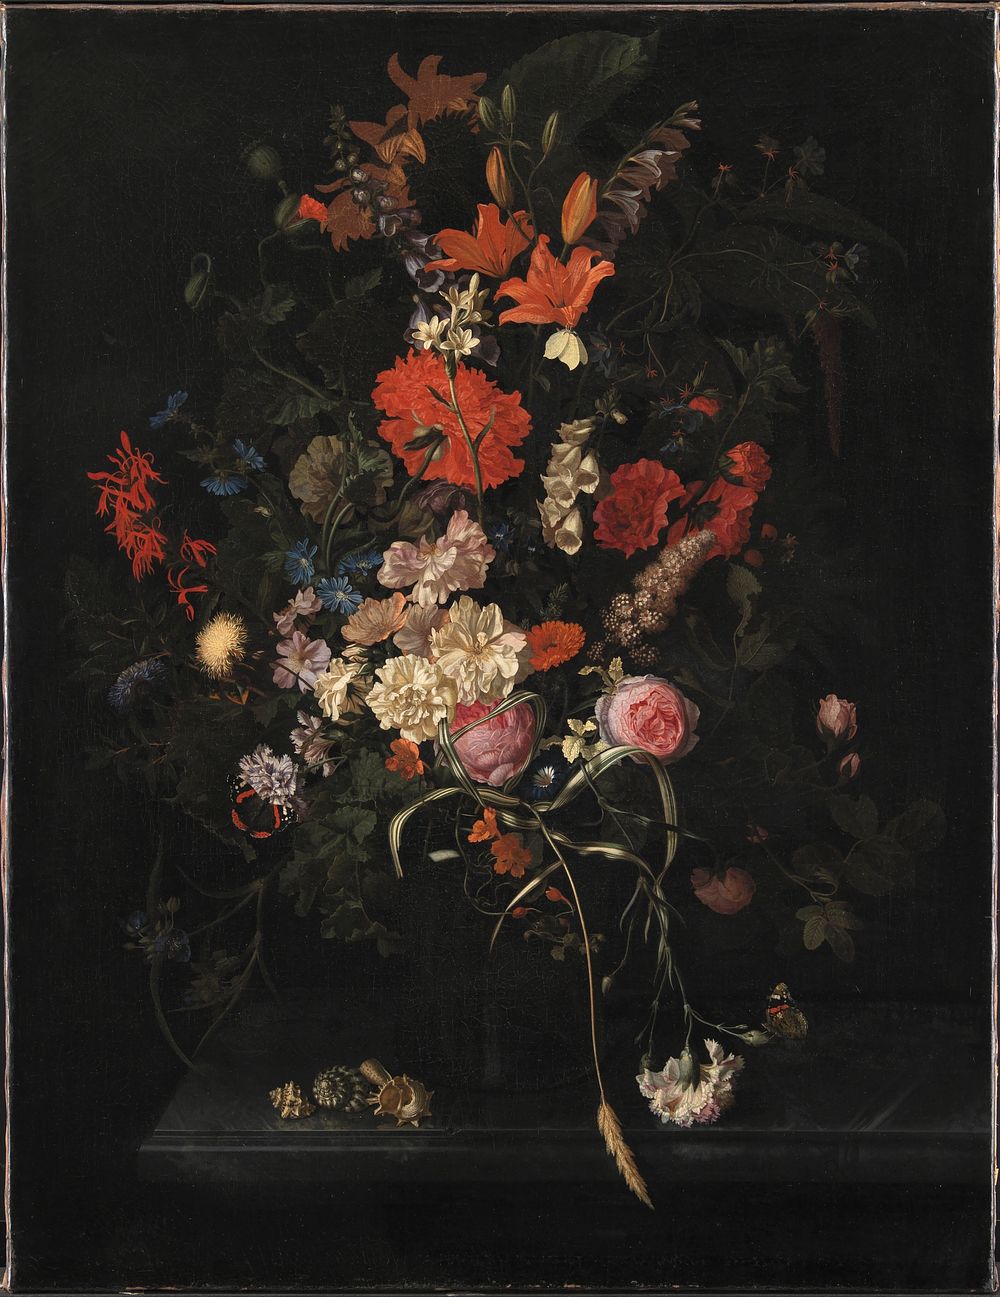 Bouquet of Flowers in a Glass Vase by Maria Van Oosterwijck